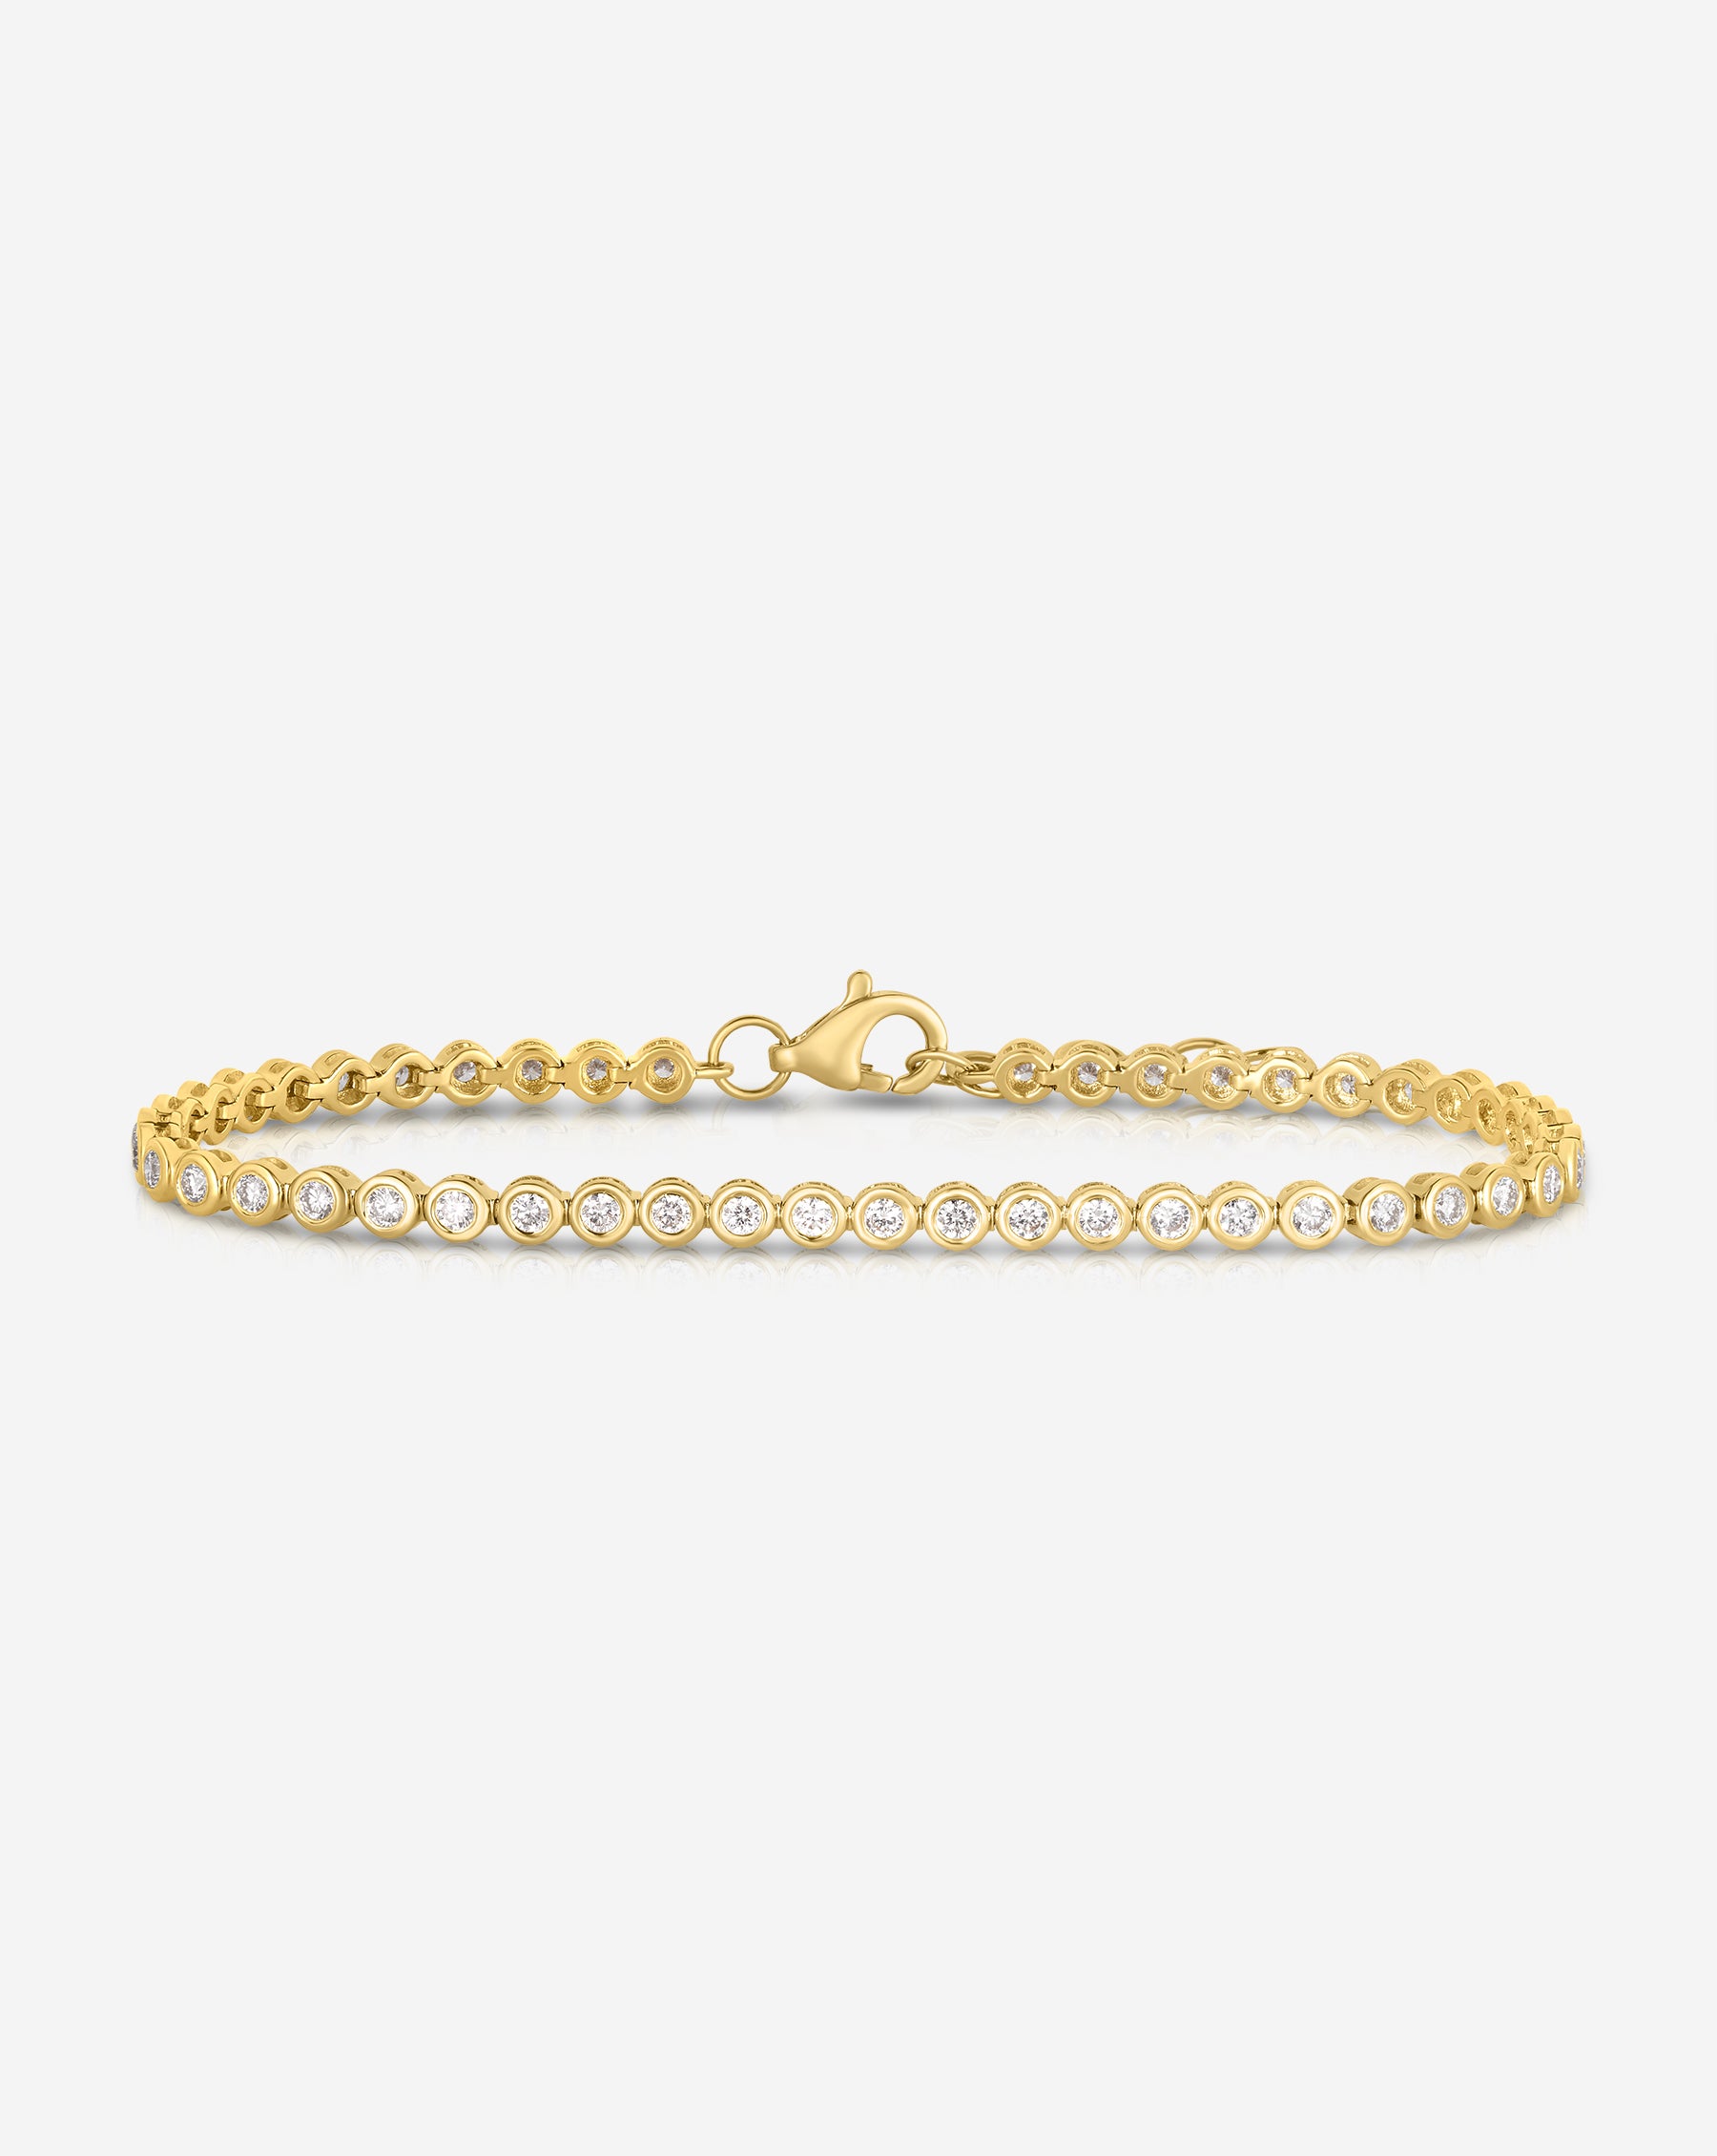 Buy 18K Gold Plated Cubic Zirconia Trendy Tennis Bracelet Set For Women |  White Gold, Yellow Gold & Rose Gold Bracelets Jewelry Gift For Girls,  Teens, Ladies, Wife, Mother, Sister, 5